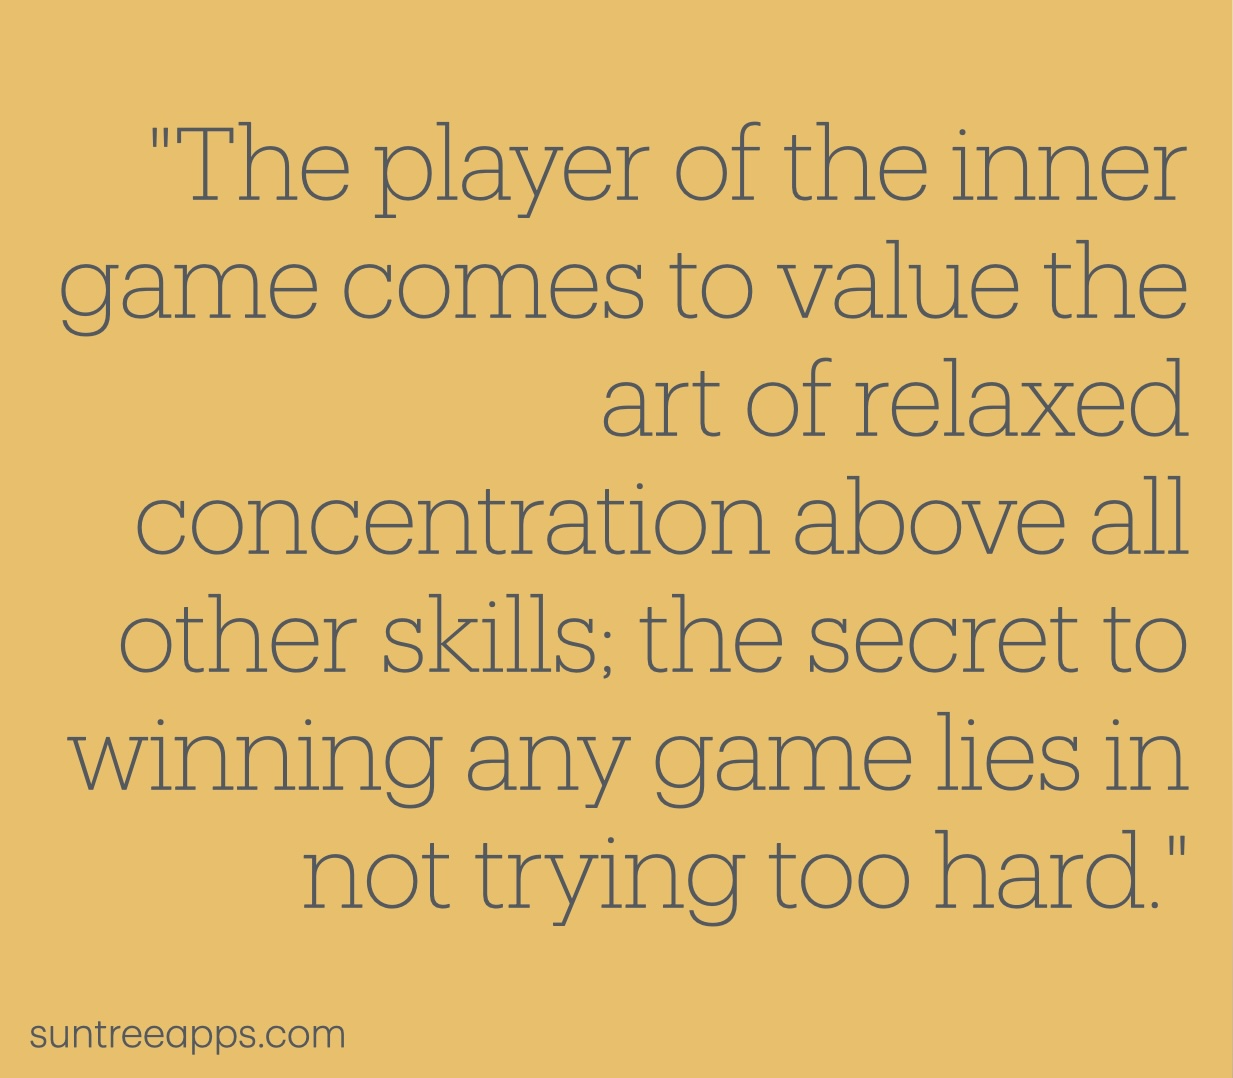 Quote: The player of the inner game comes to value the art of relaxed concentration above all other skills; the secret to winning any game lies in not trying too hard.